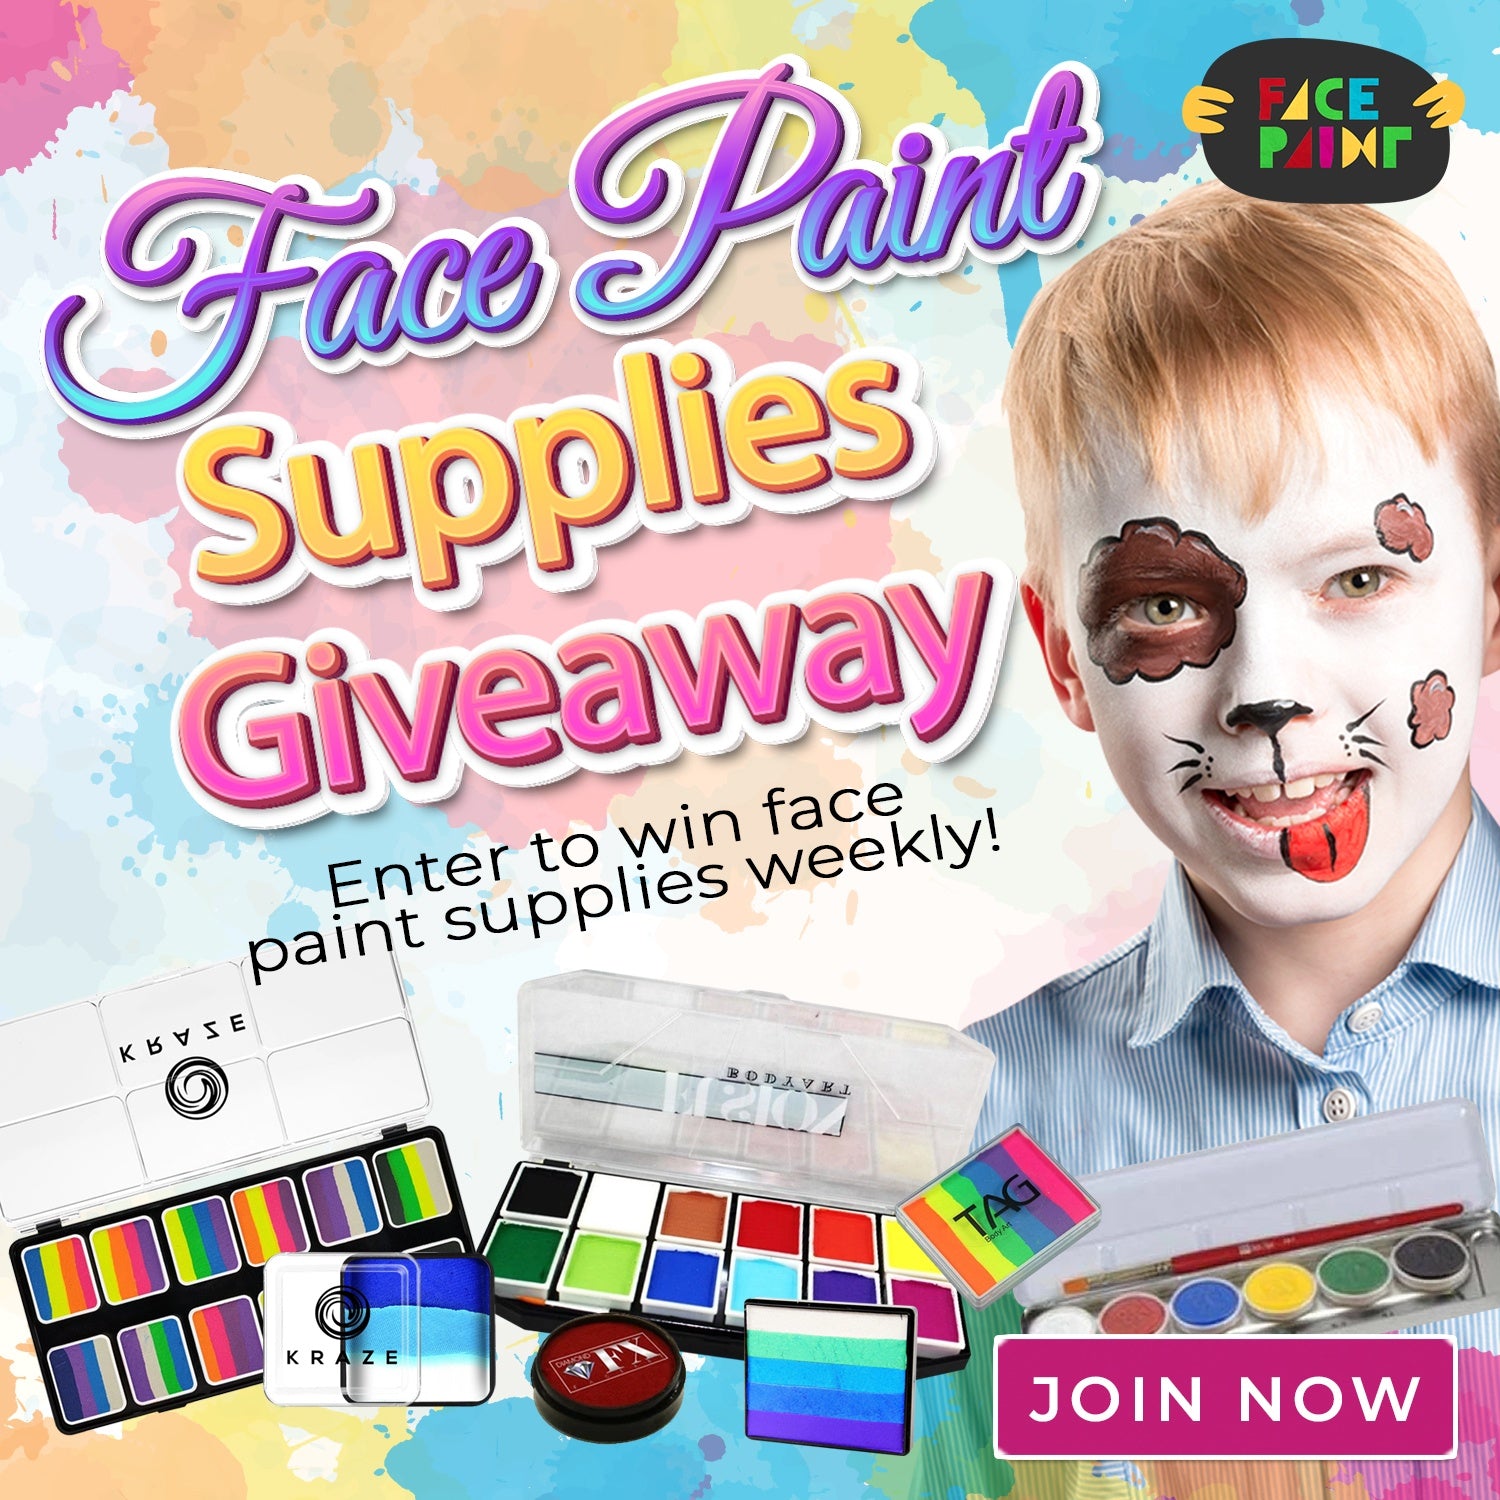 Face Paint Supplies Weekly Giveaway Winners for May 2020